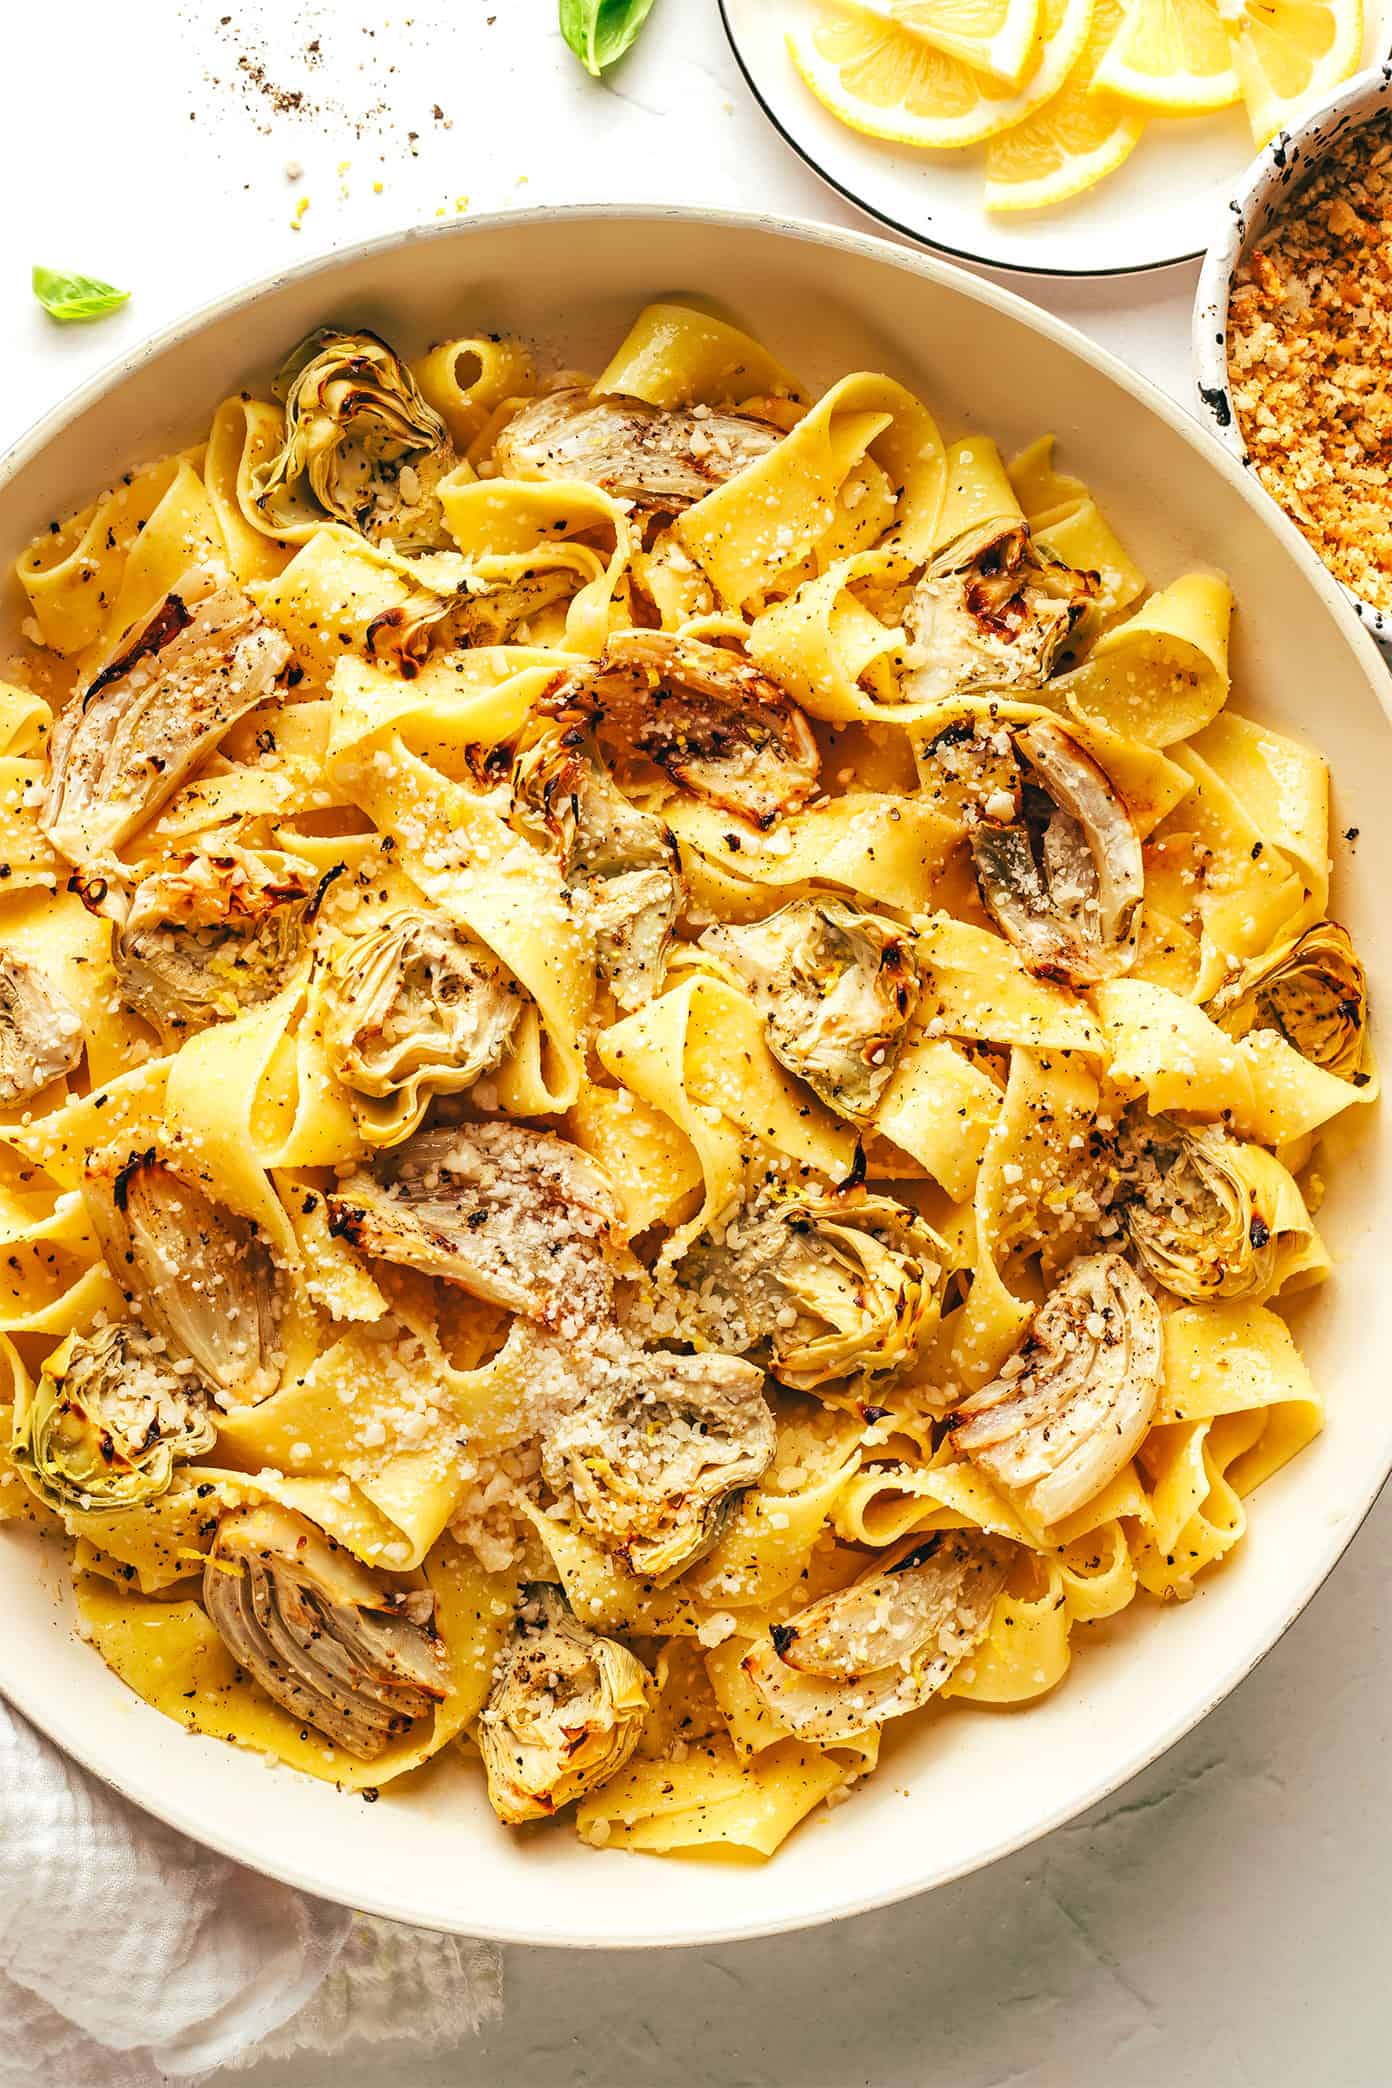 Lemon Brown Butter Pasta in Pan with Roasted Artichokes and Fennel and Garlic Breadcrumbs